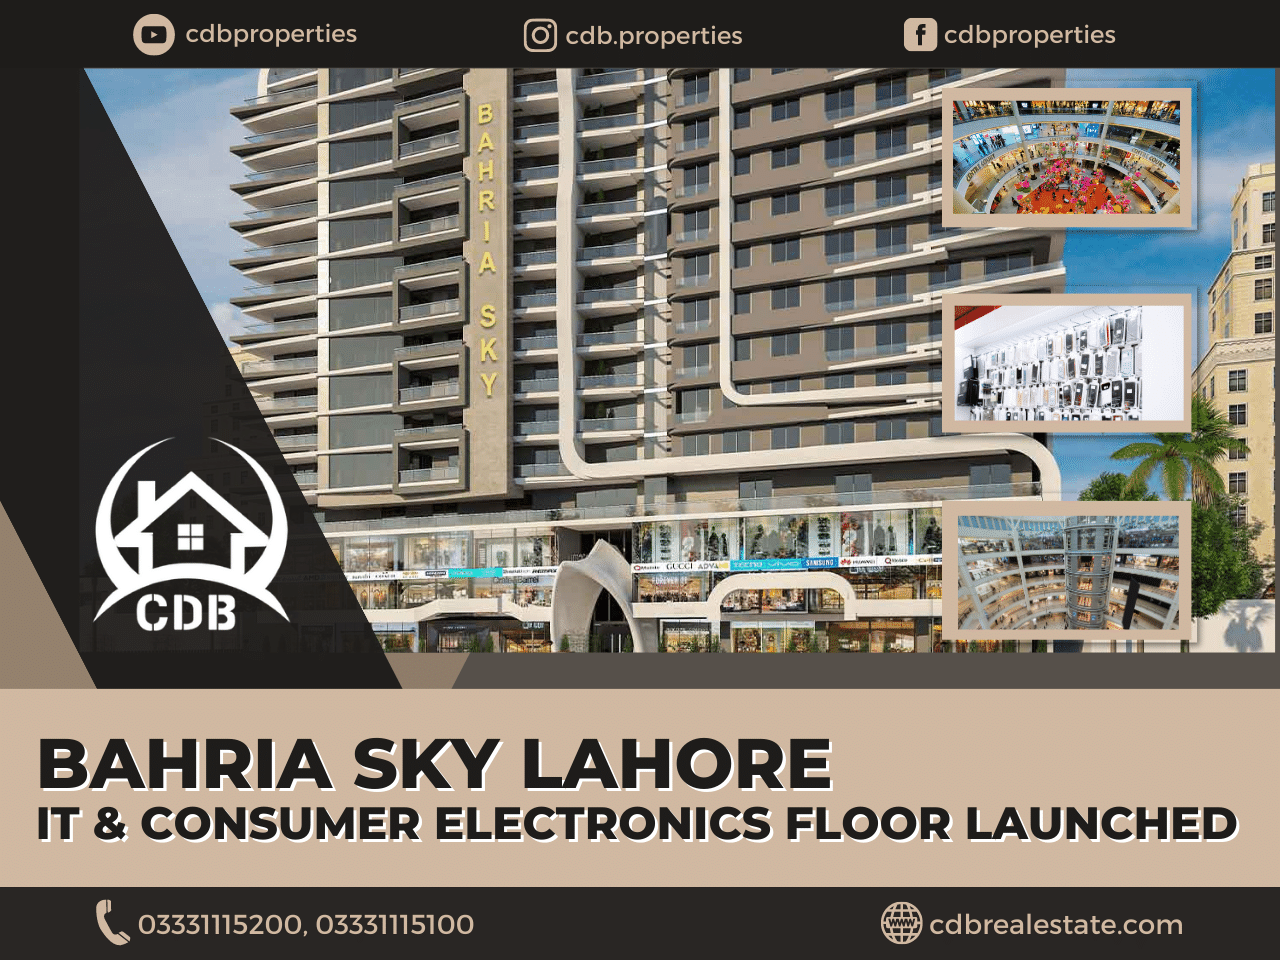 Bahria Sky Lahore - IT & Consumer Electronics Floor Launched